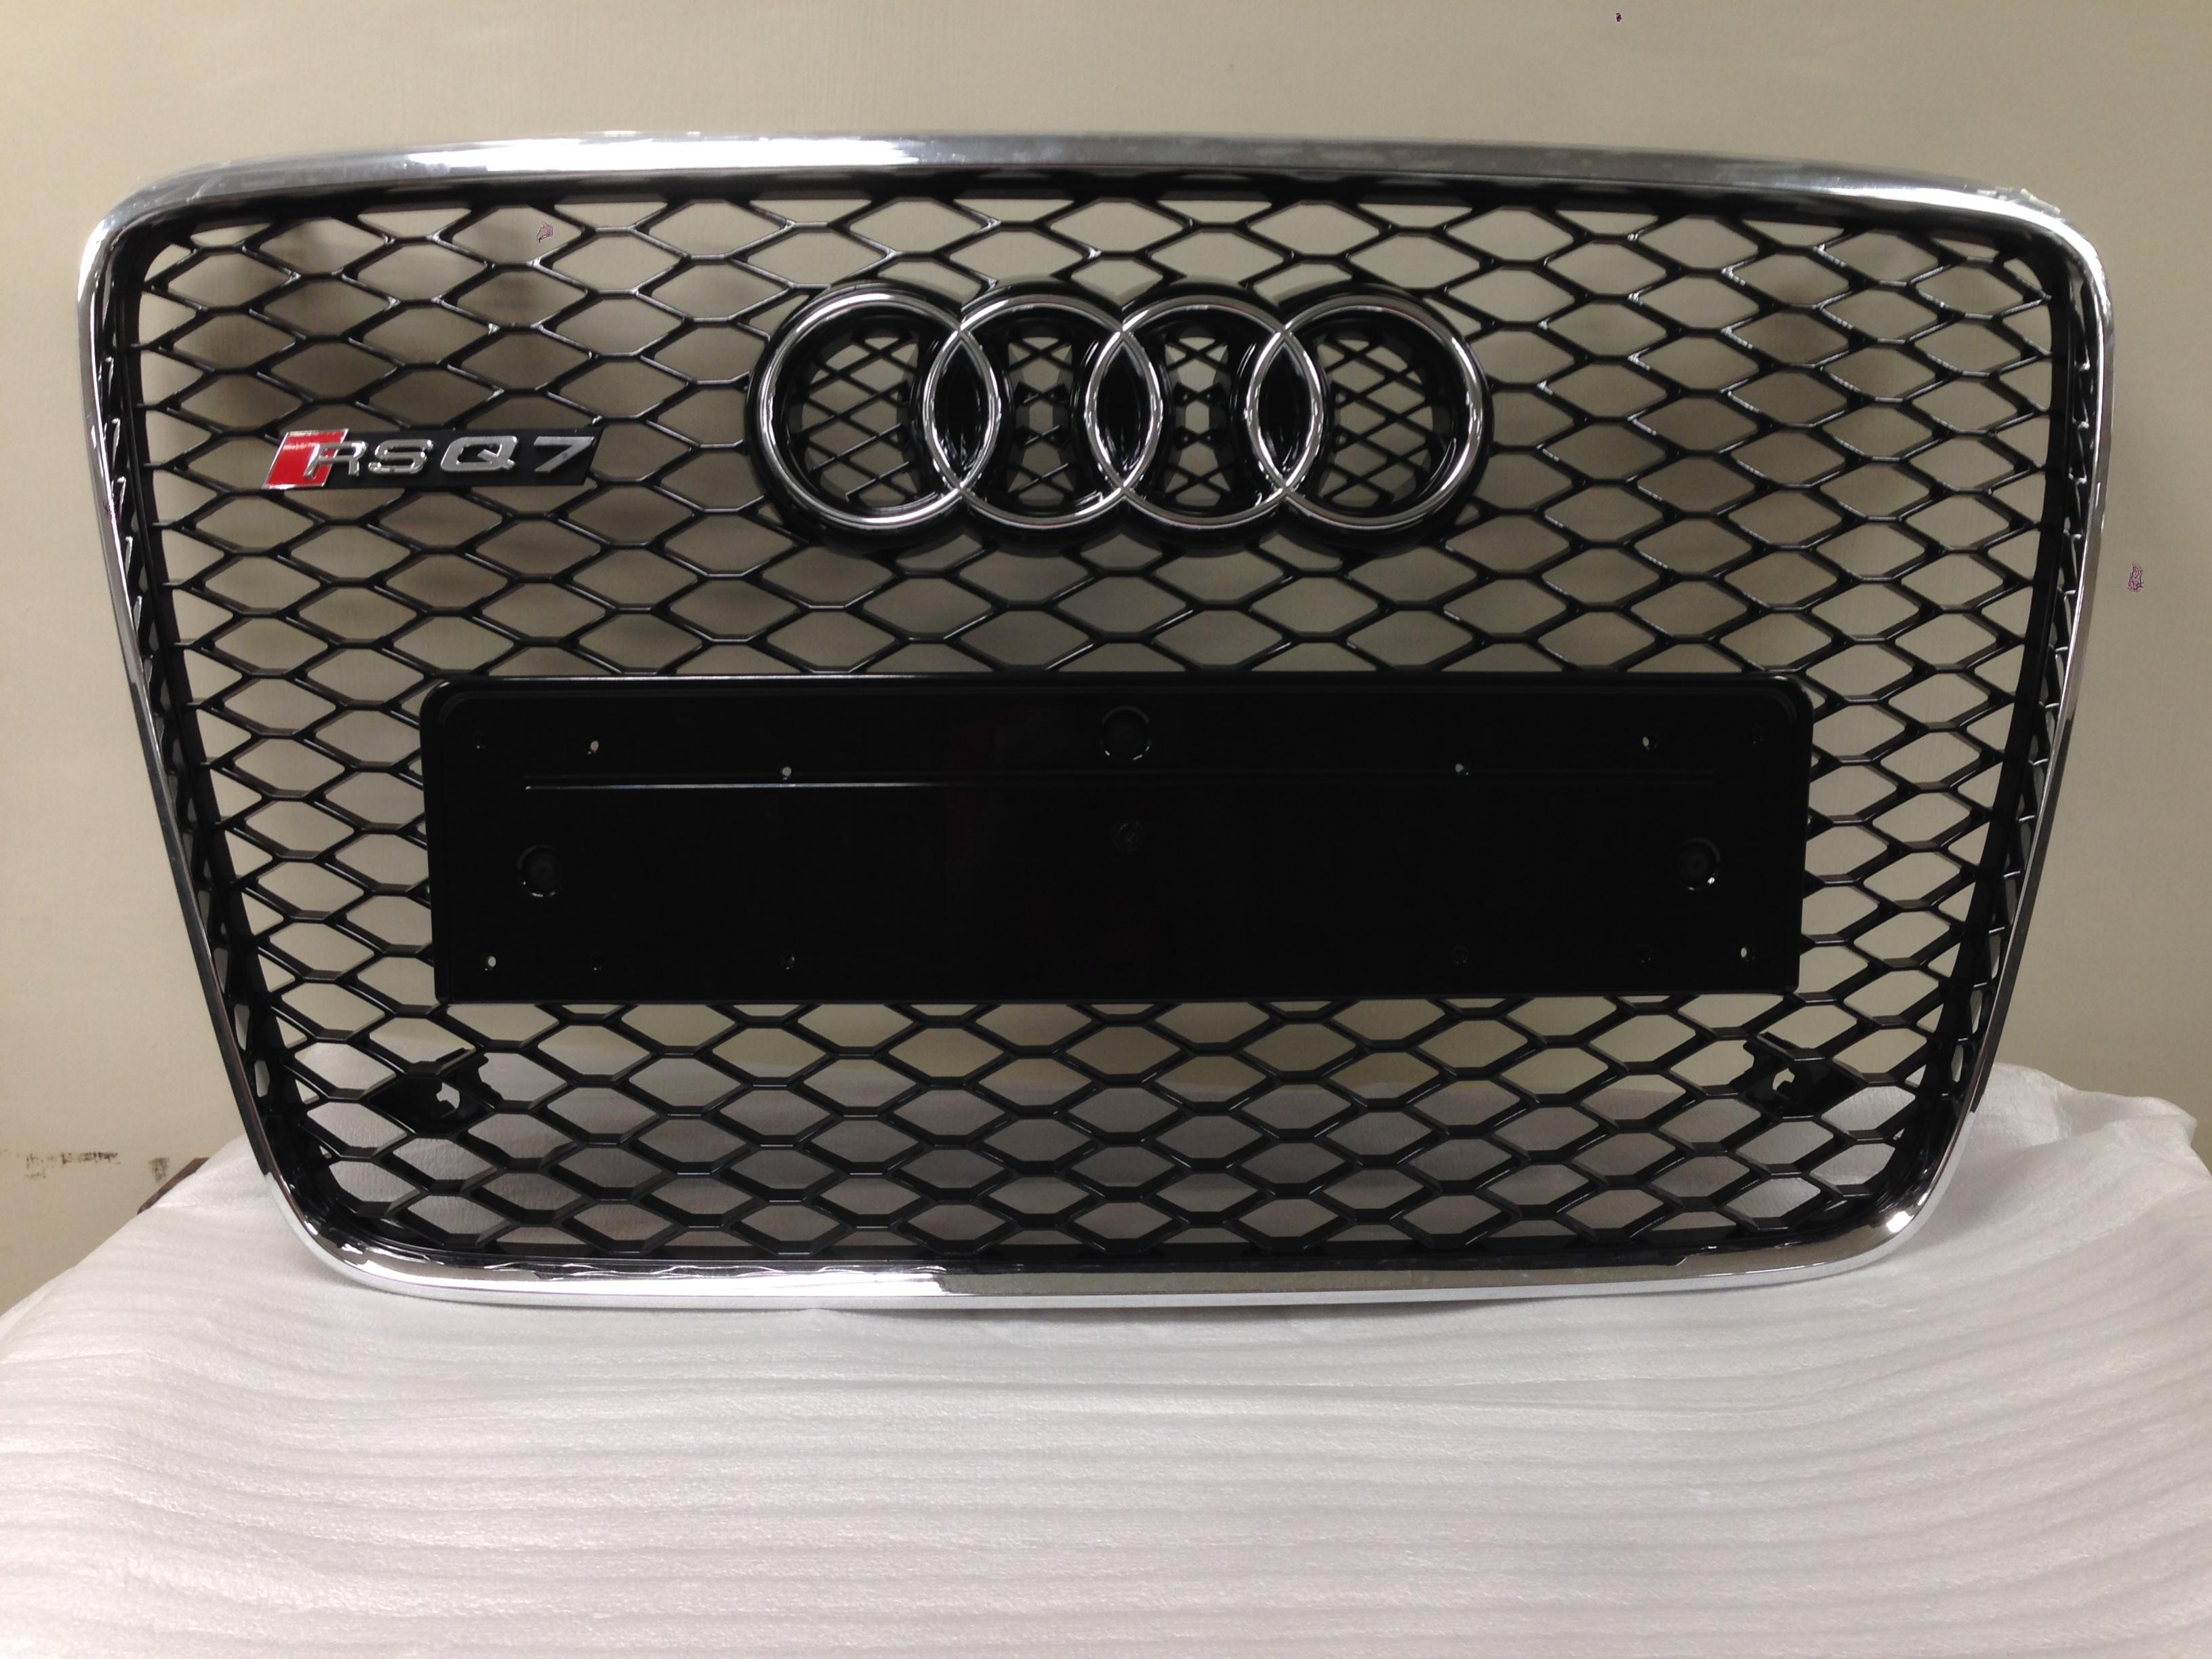 For Audi Q7 RSQ7 2006-2015 Black Honeycomb Center Grille Grill W/Silver Rings